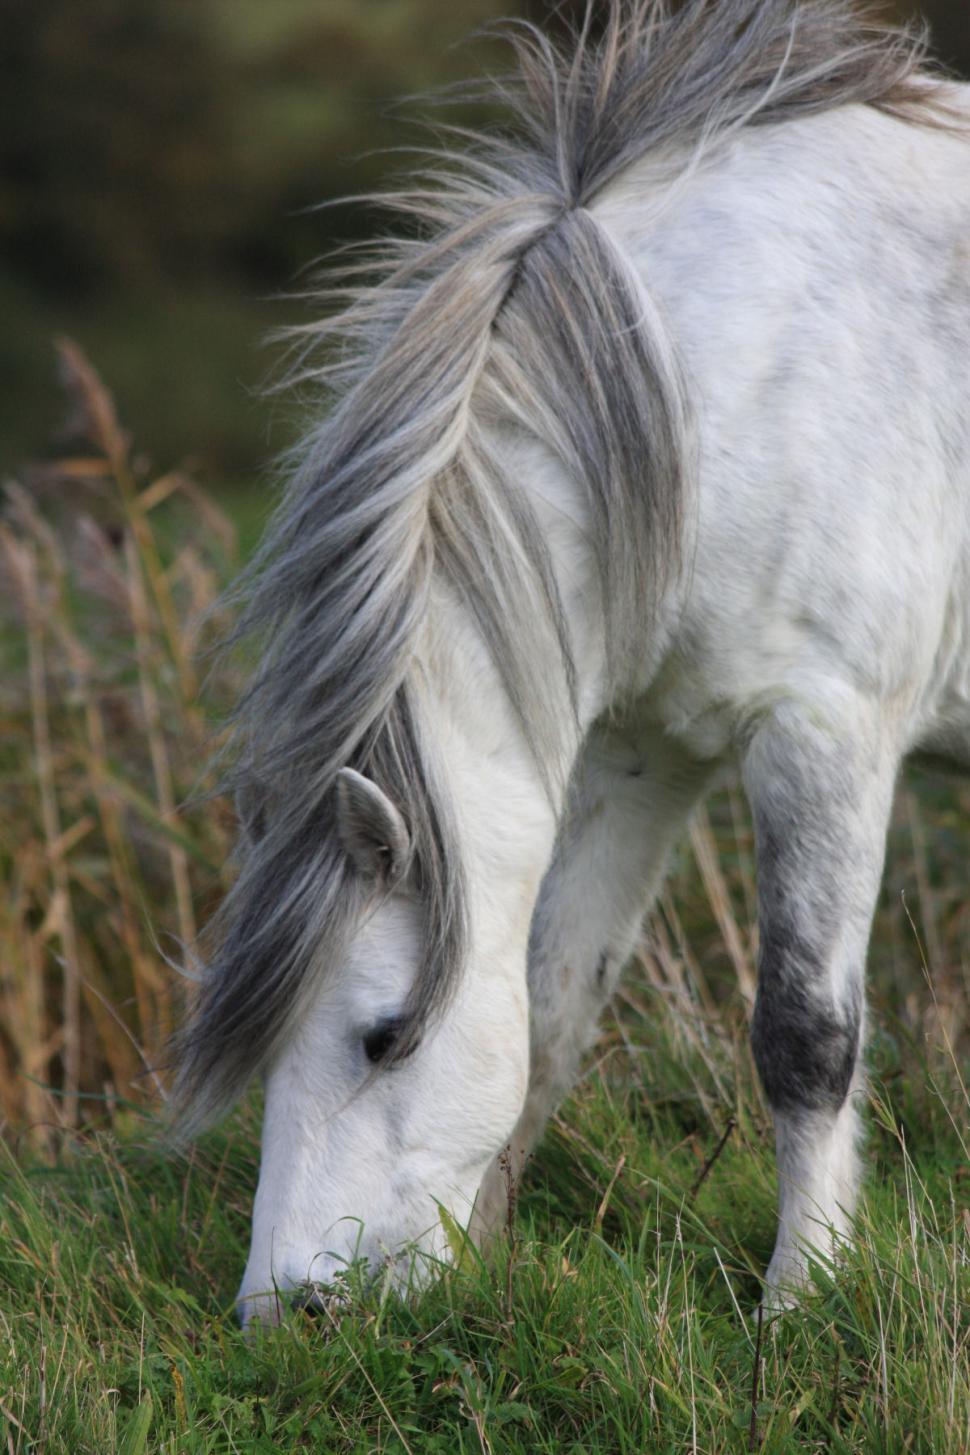 Free Image of White and Gray Horse Grazing in Field 